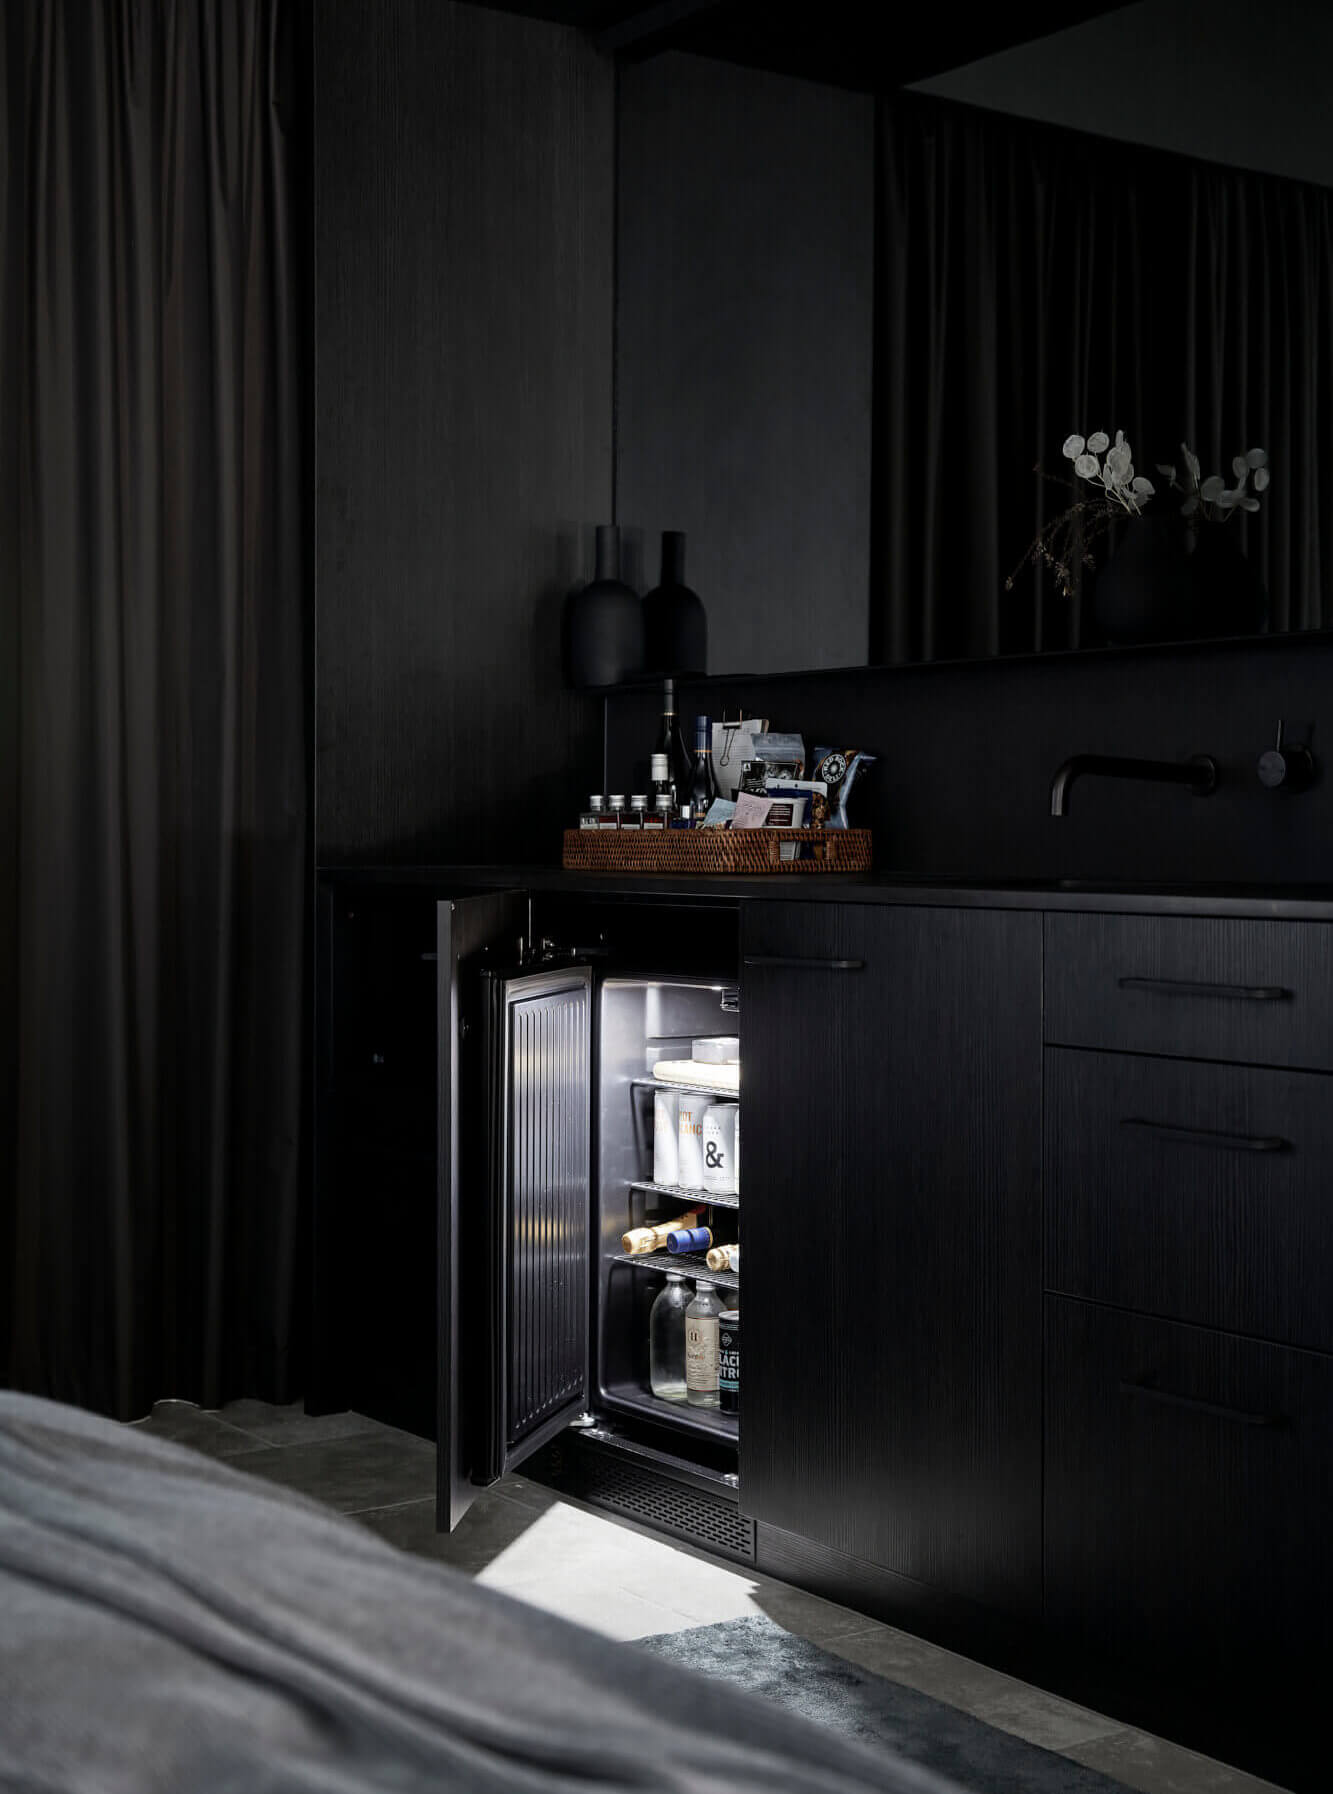 Gourmet mini-bar built into custom black joinery at the Deluxe King Rooms at The Bower Byron Bay hotel